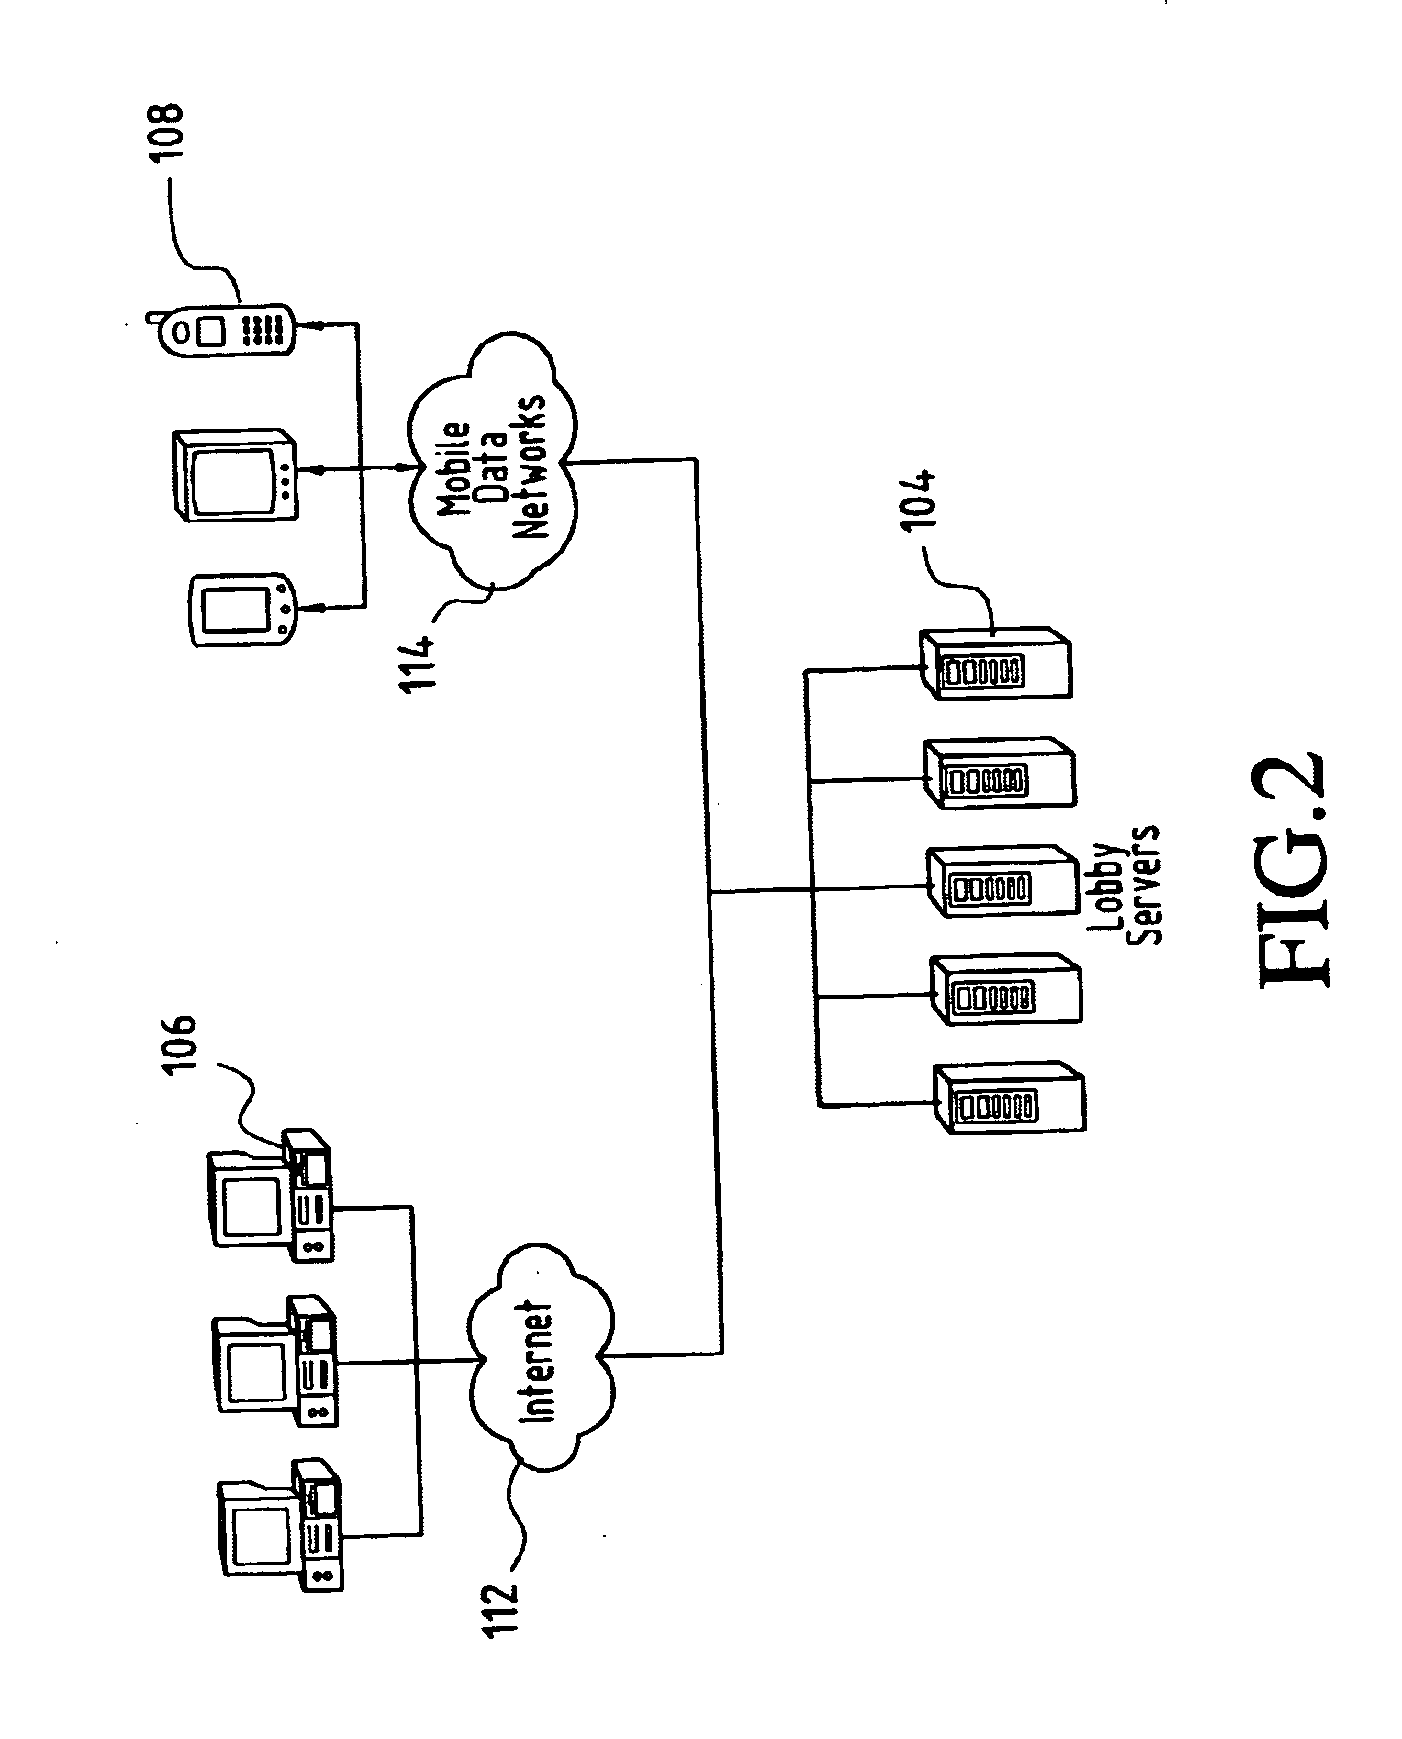 Game server system and method for generating revenue therewith